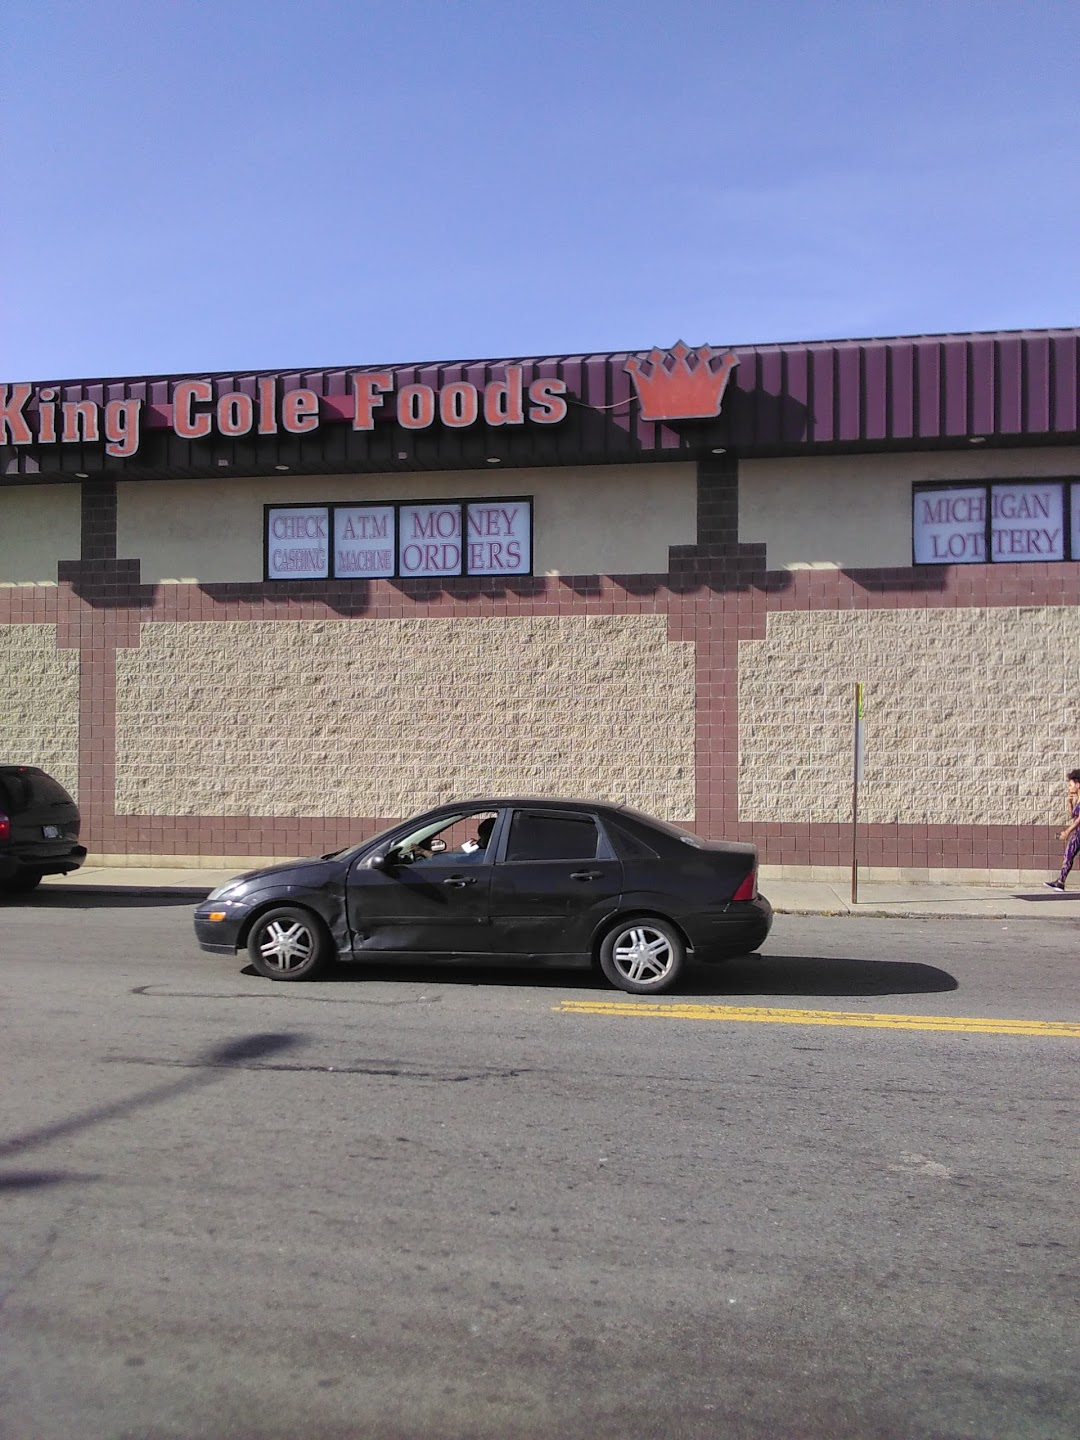 King Cole Foods